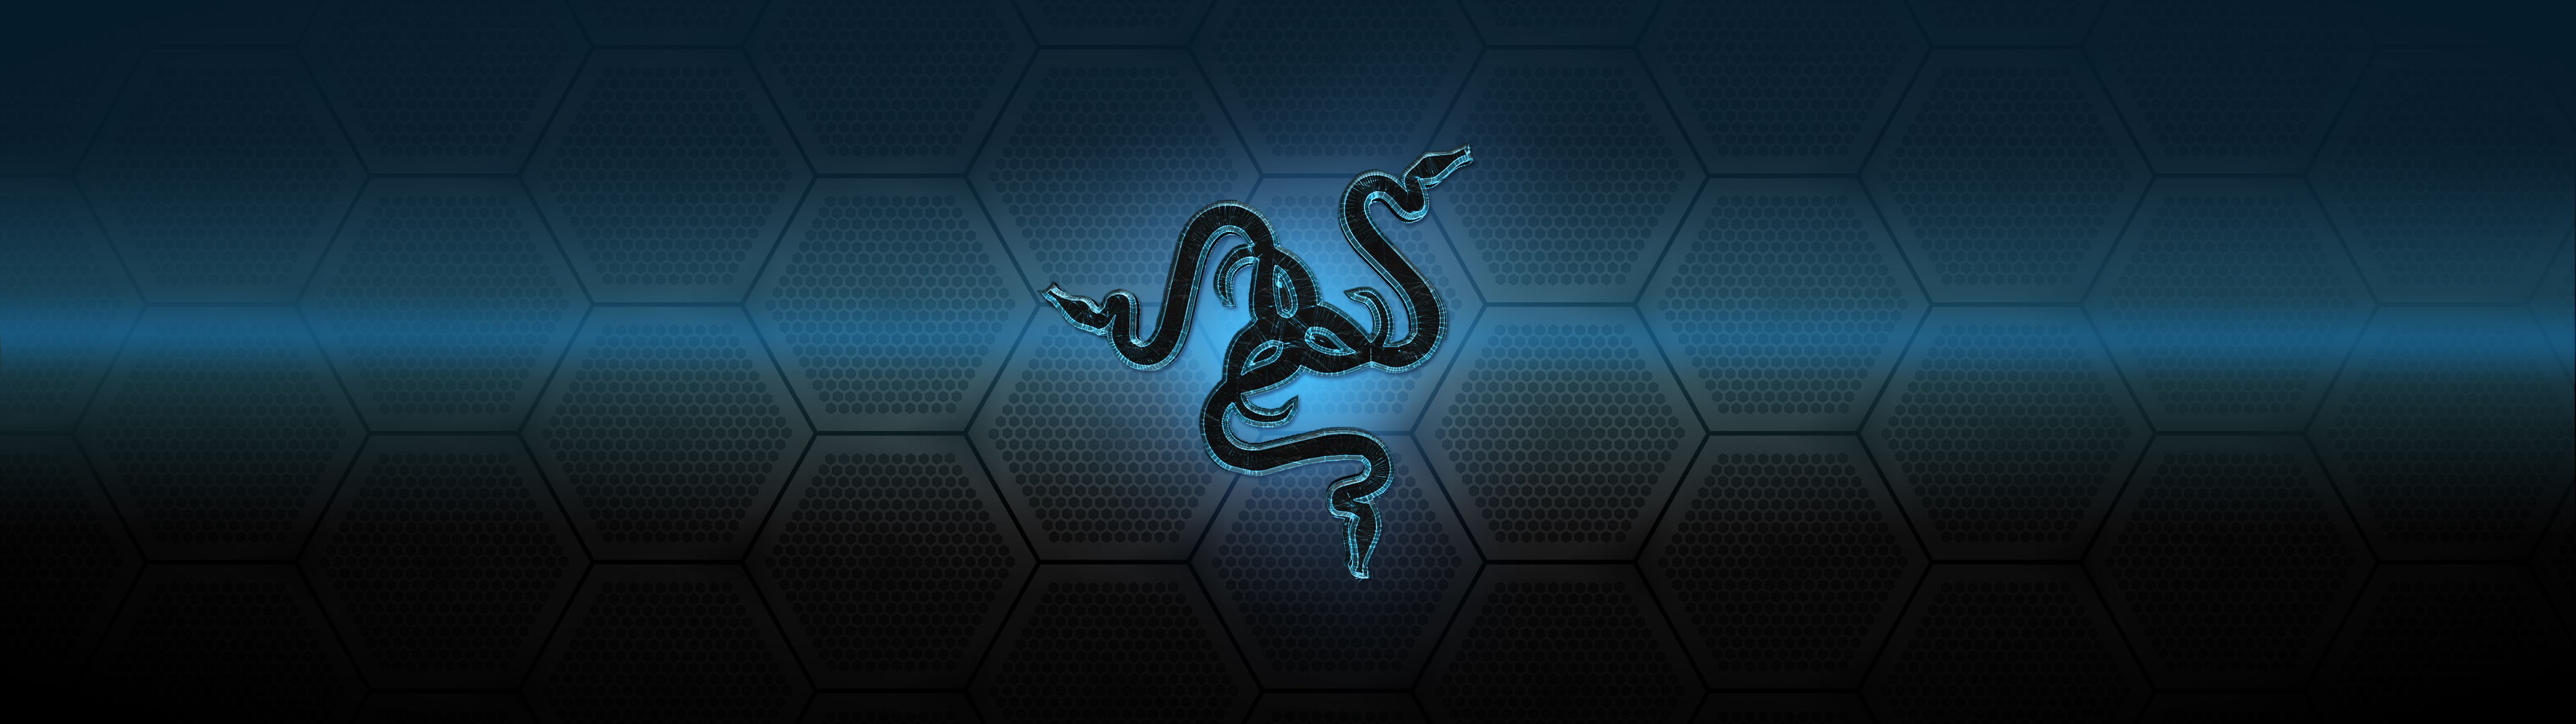 Razer Wallpaper By Wifsimster For Your